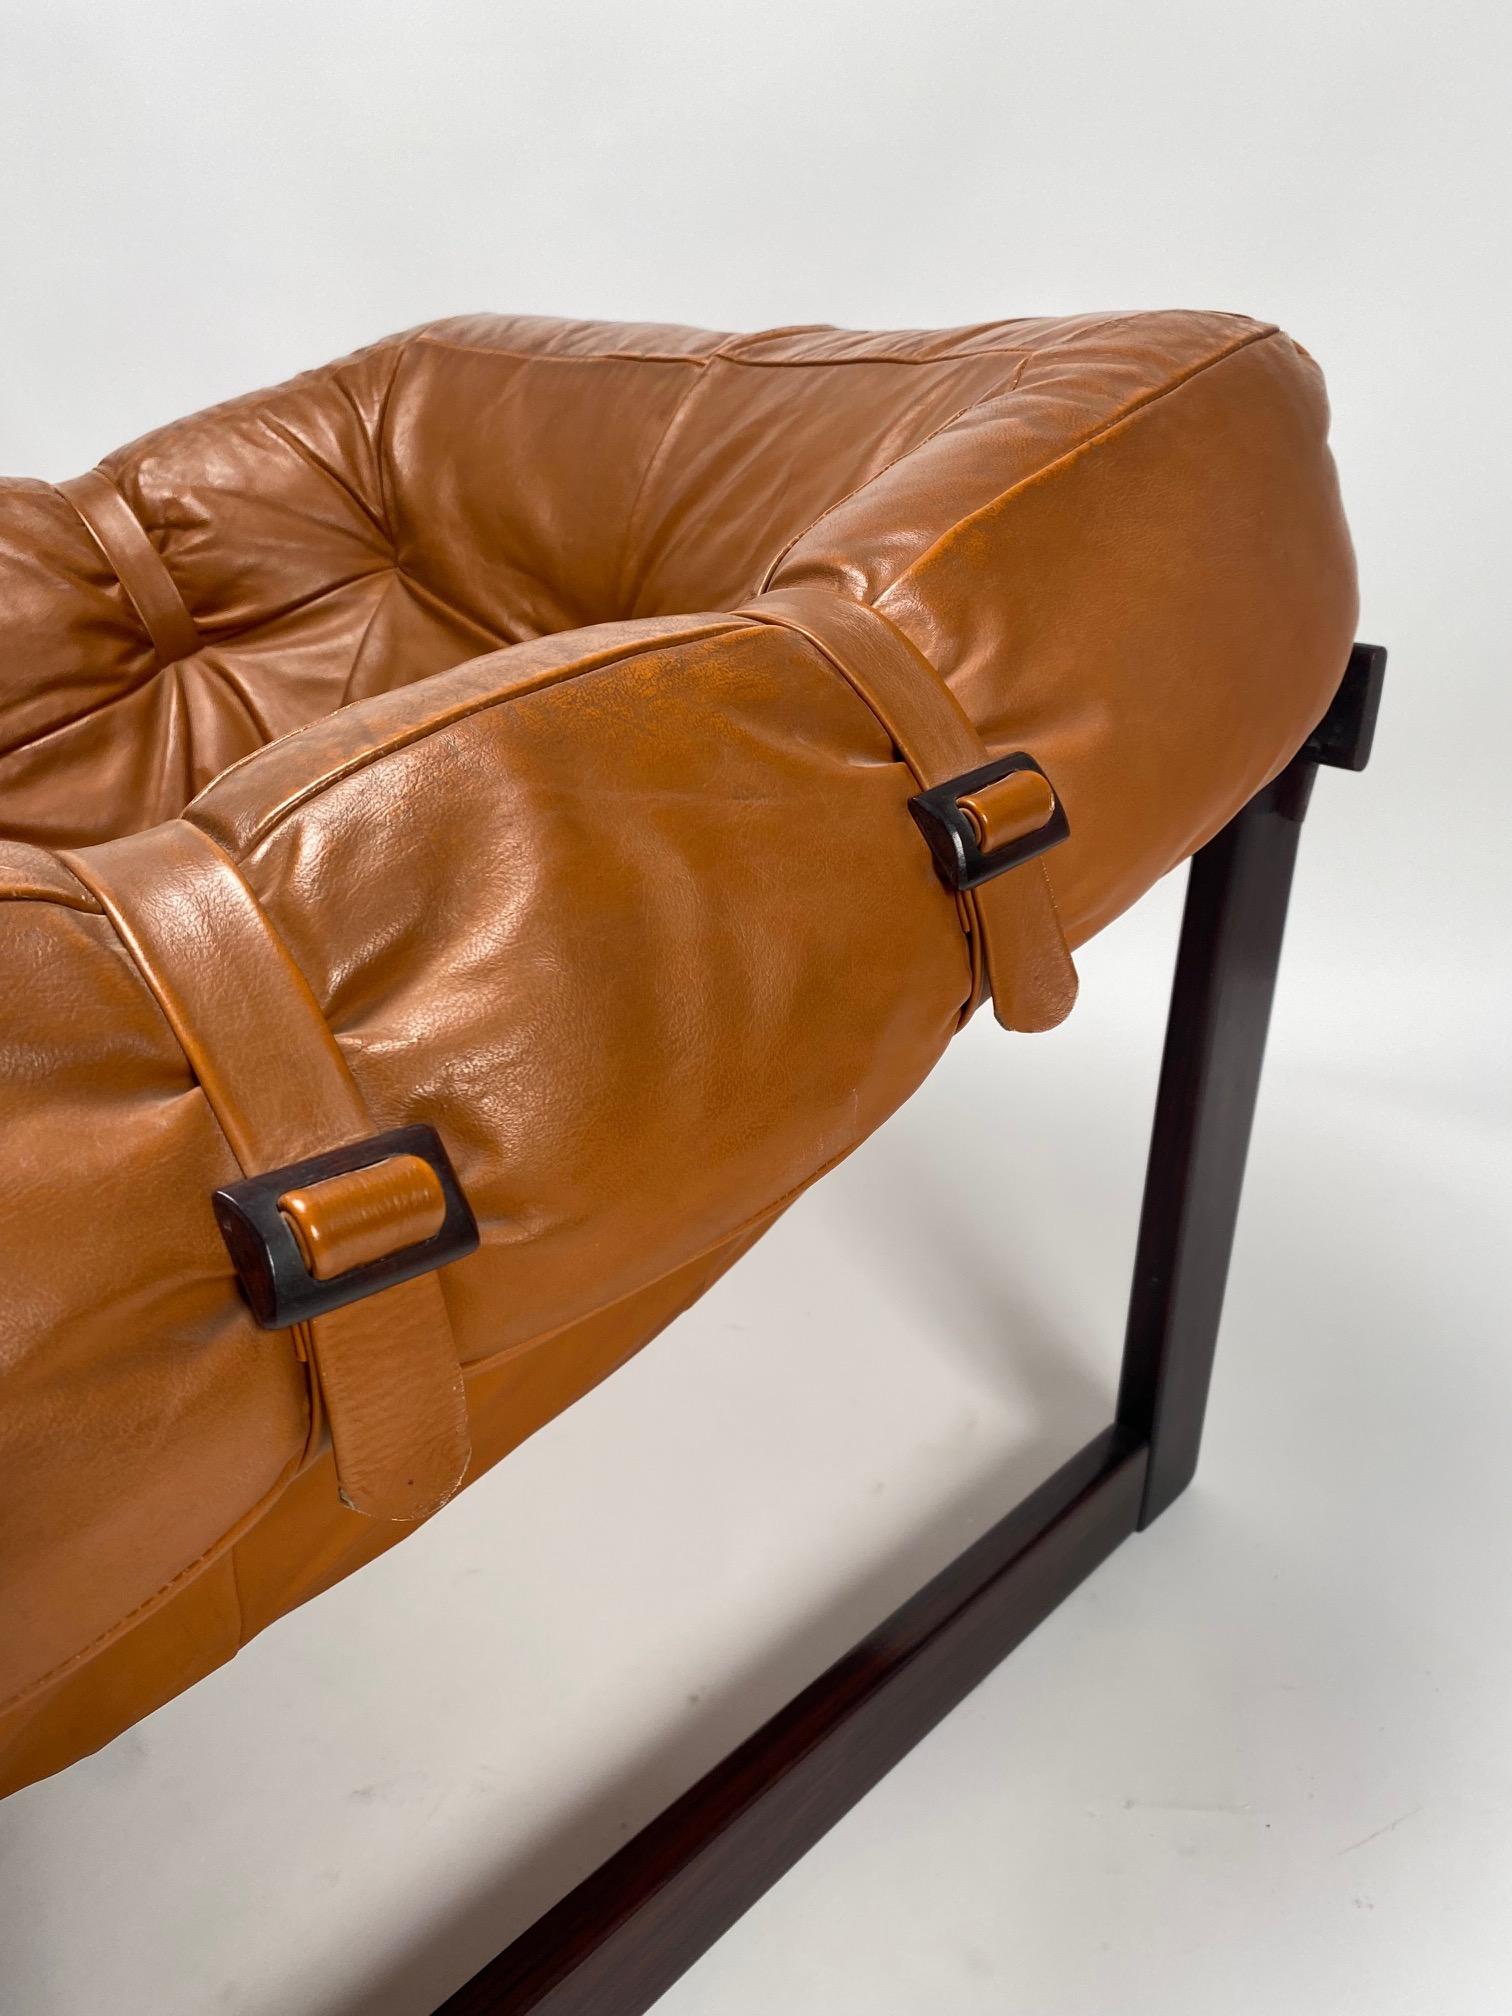 Brazilian Set of 2 MP-091 Lounge Chairs by Percival Lafer, wood and leather, Brazil, 1960S